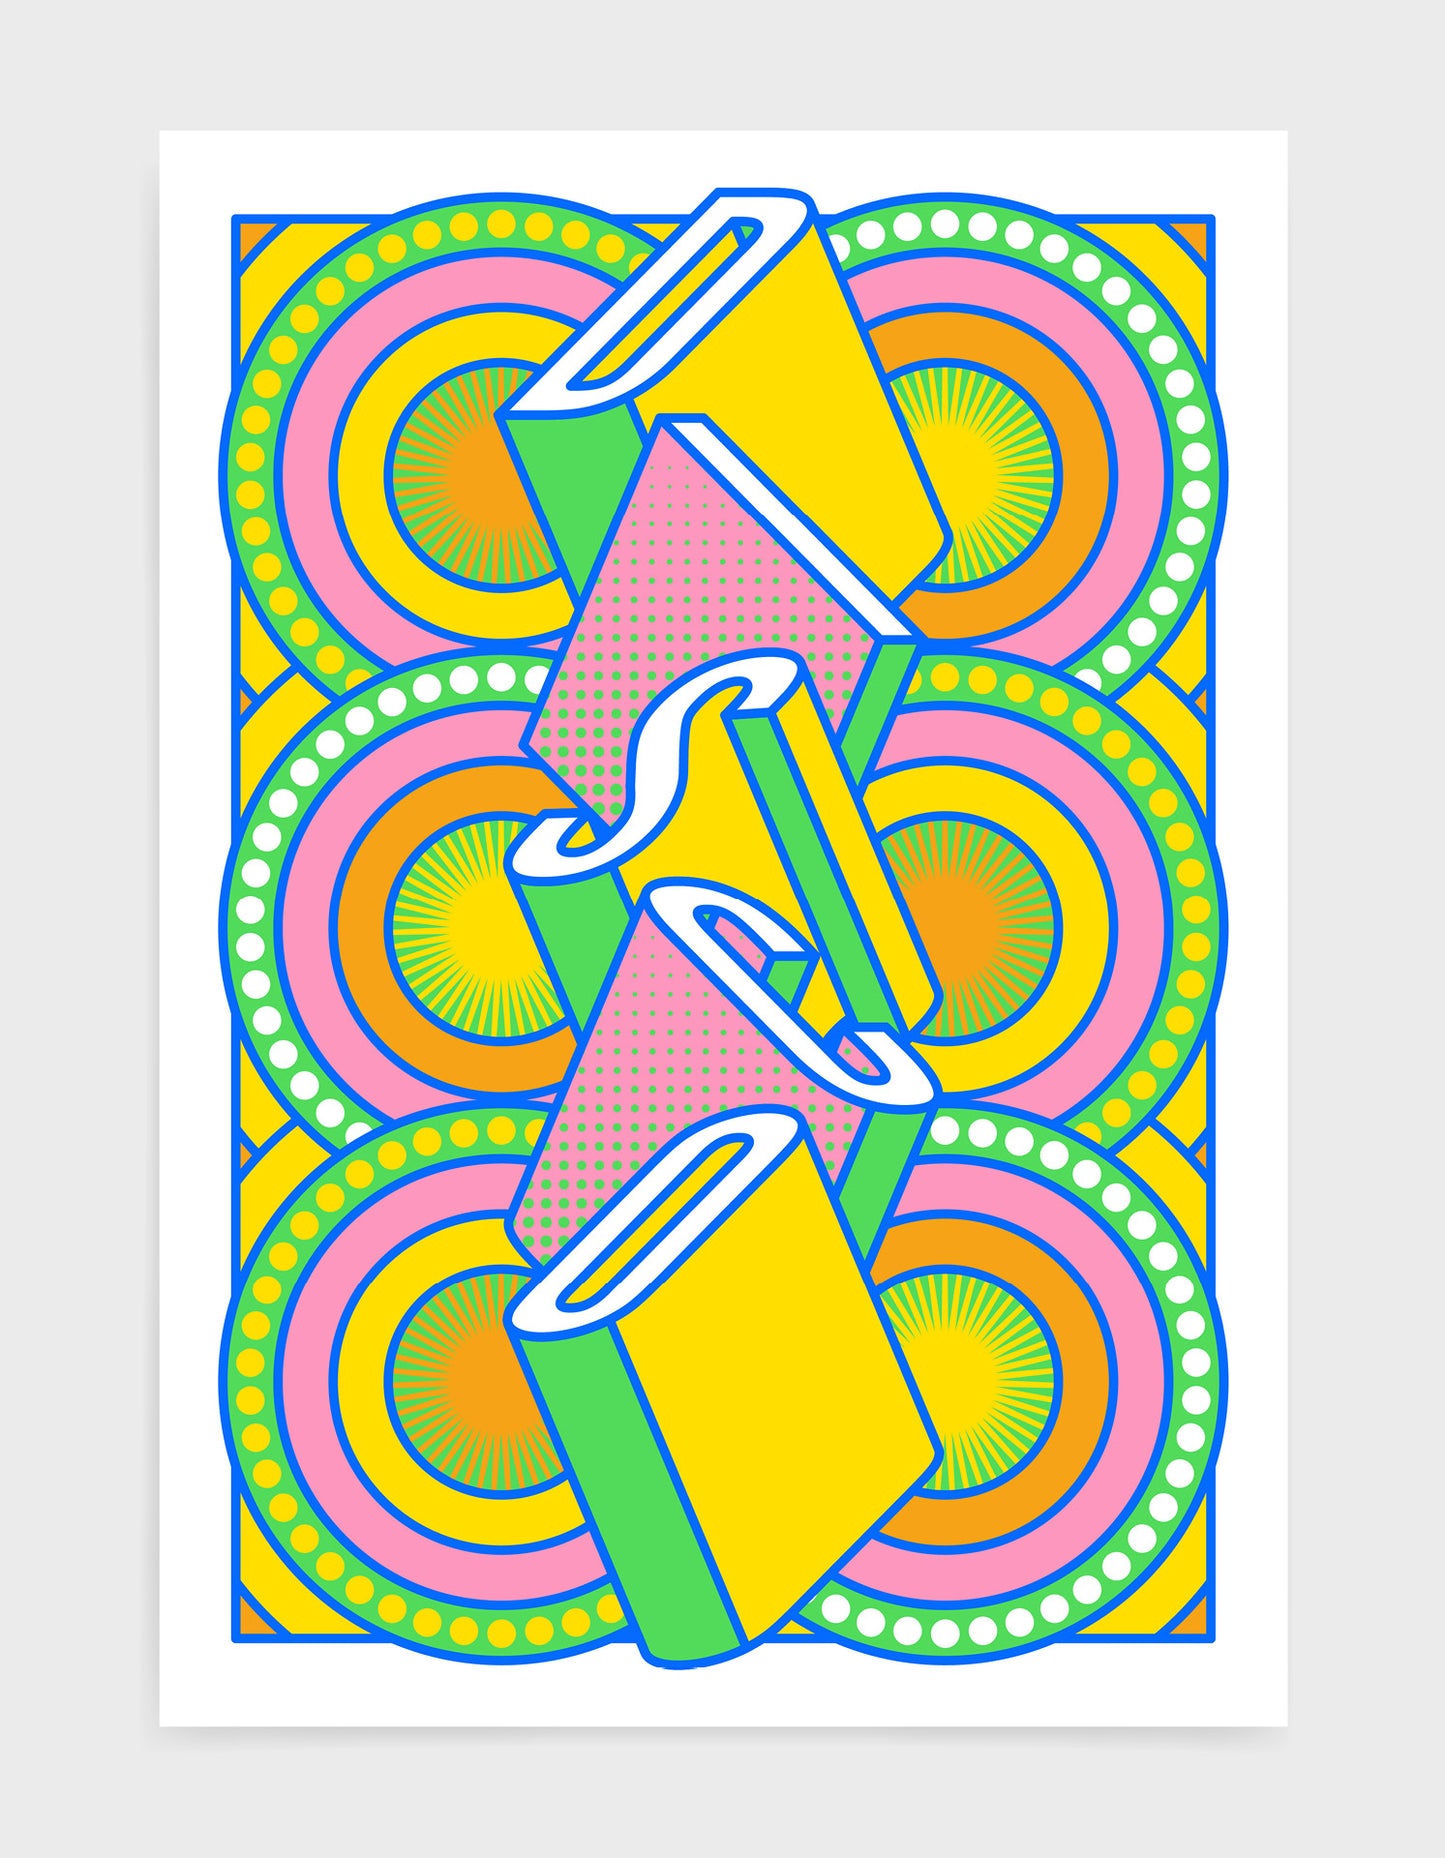 disco music art print featuring a geometric abstract pattern in bold shapes and vibrant rainbow colours. Block typography depicts the word disco in tumbling text